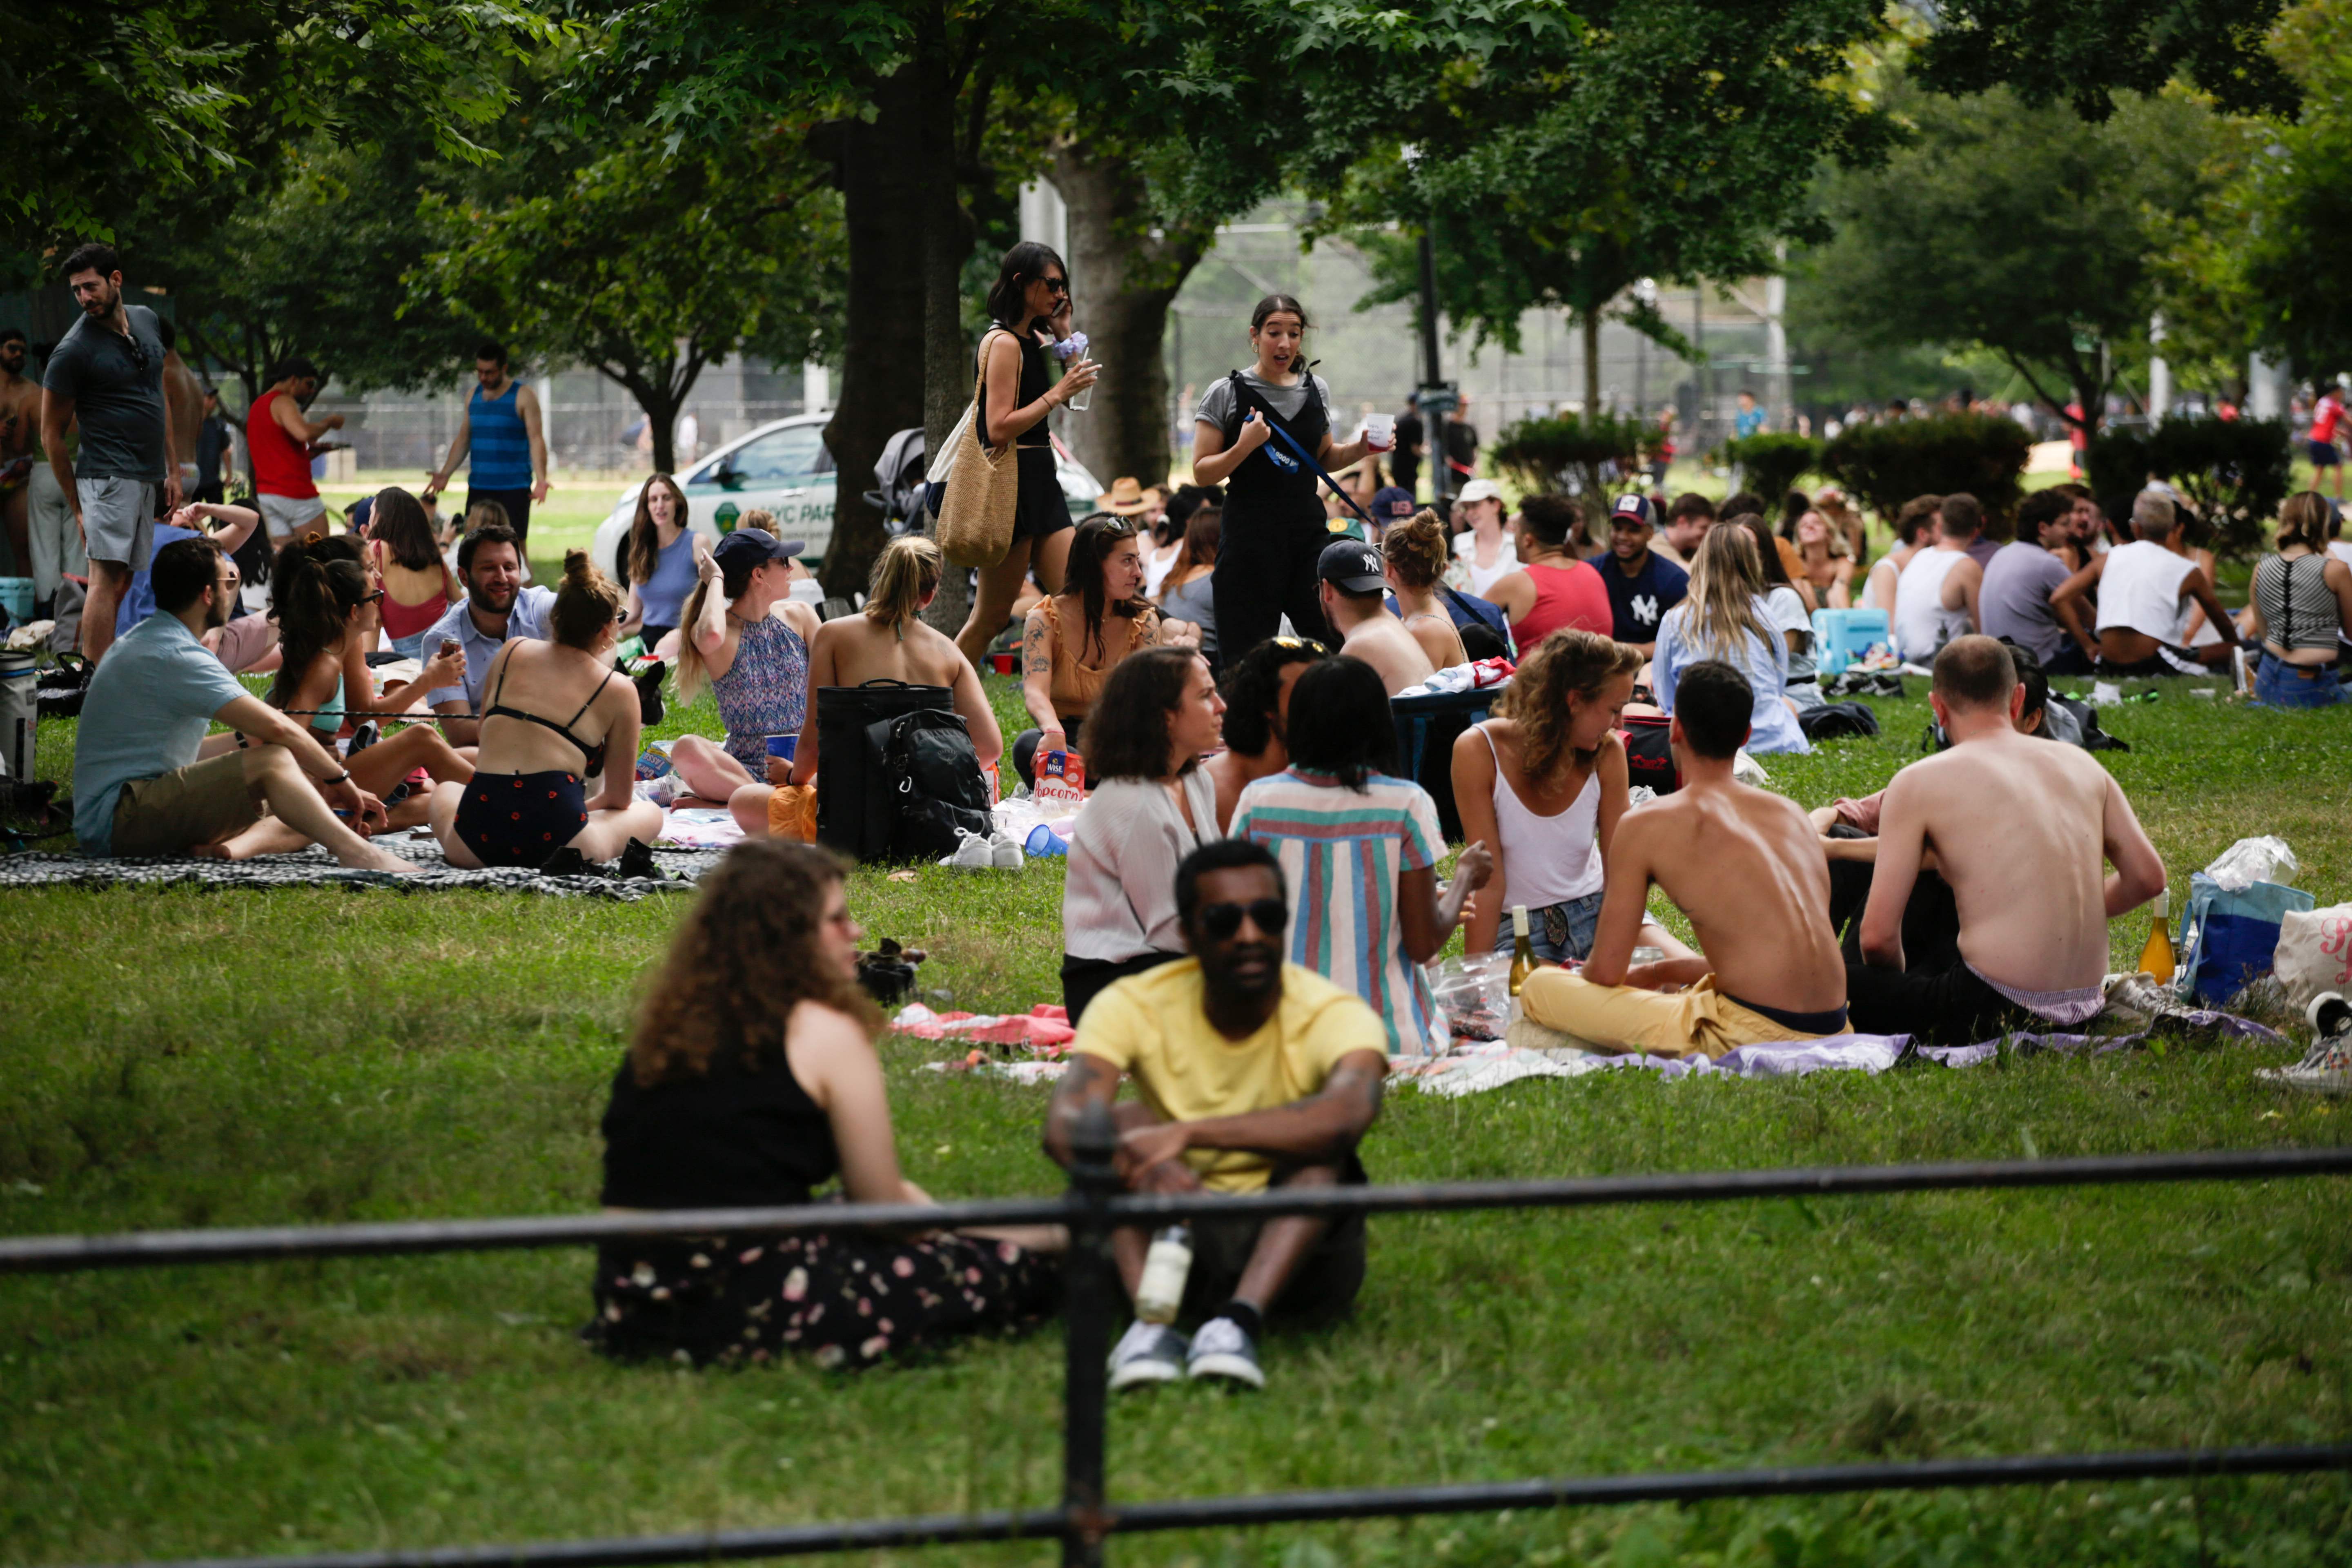 People gather in McCarren Park during the US Independence Day holiday in New York on 4 July